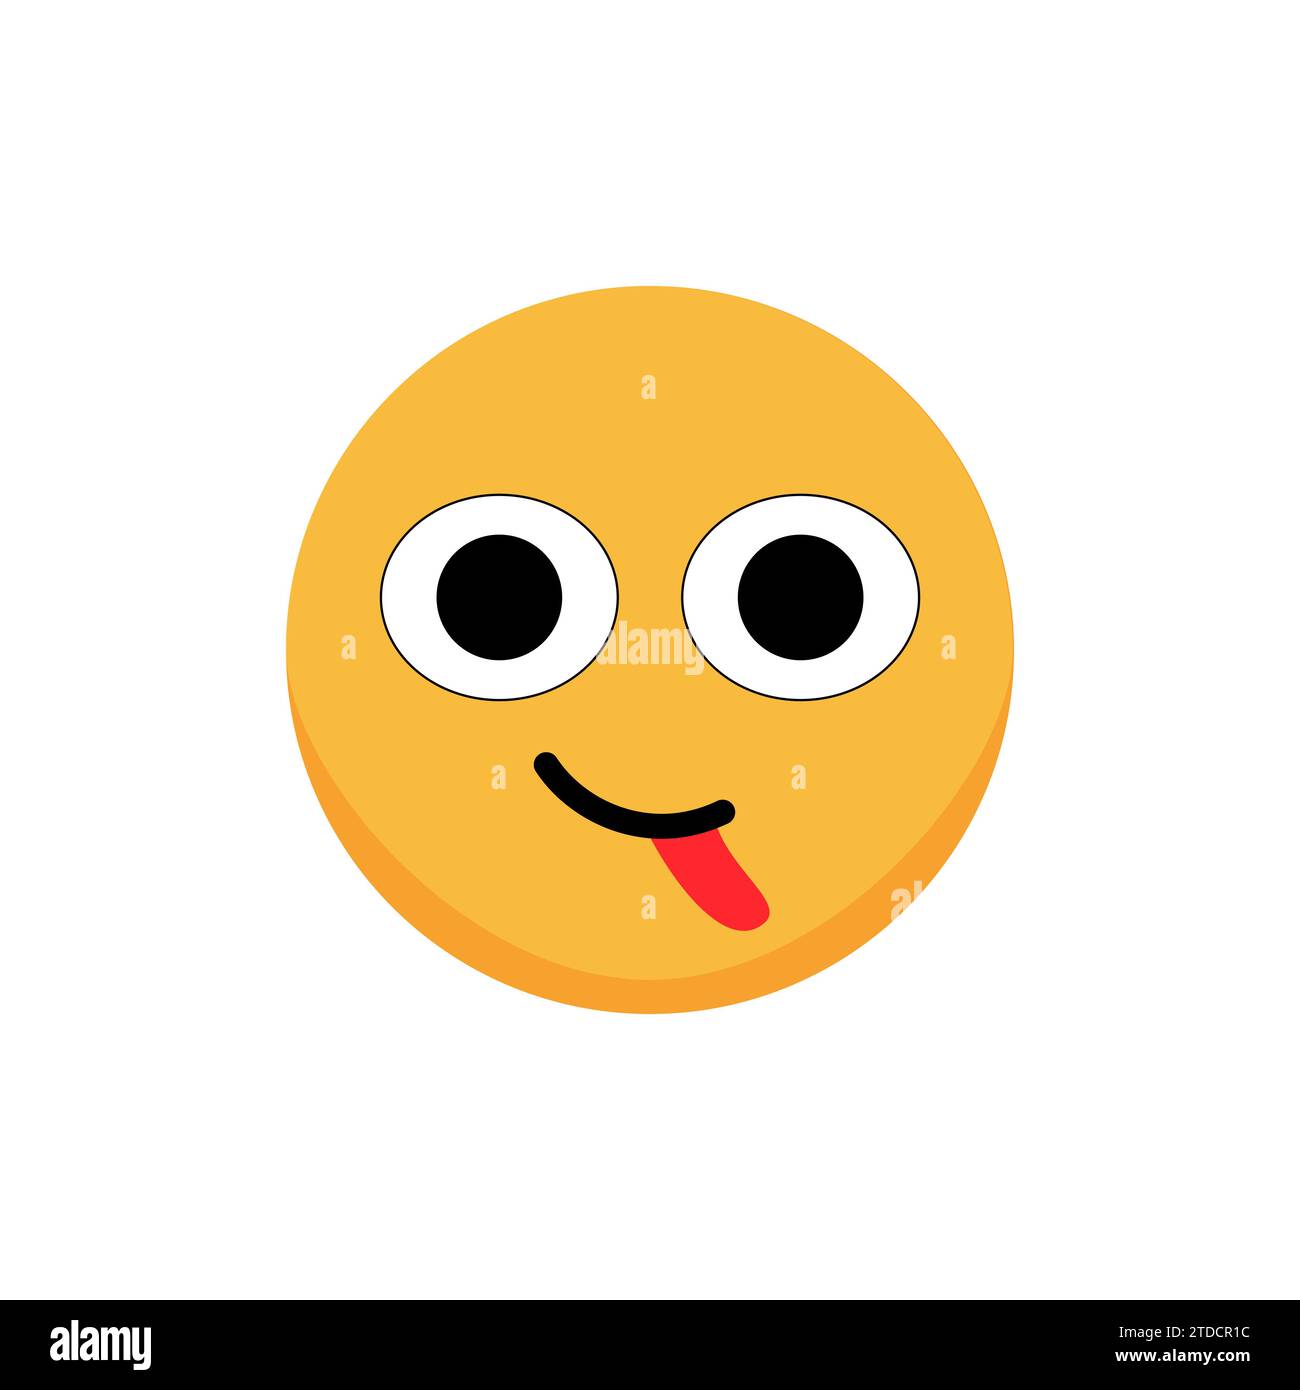 Smiley with tongue sticking out. Cartoon emoji. Flat vector illustration. Stock Vector